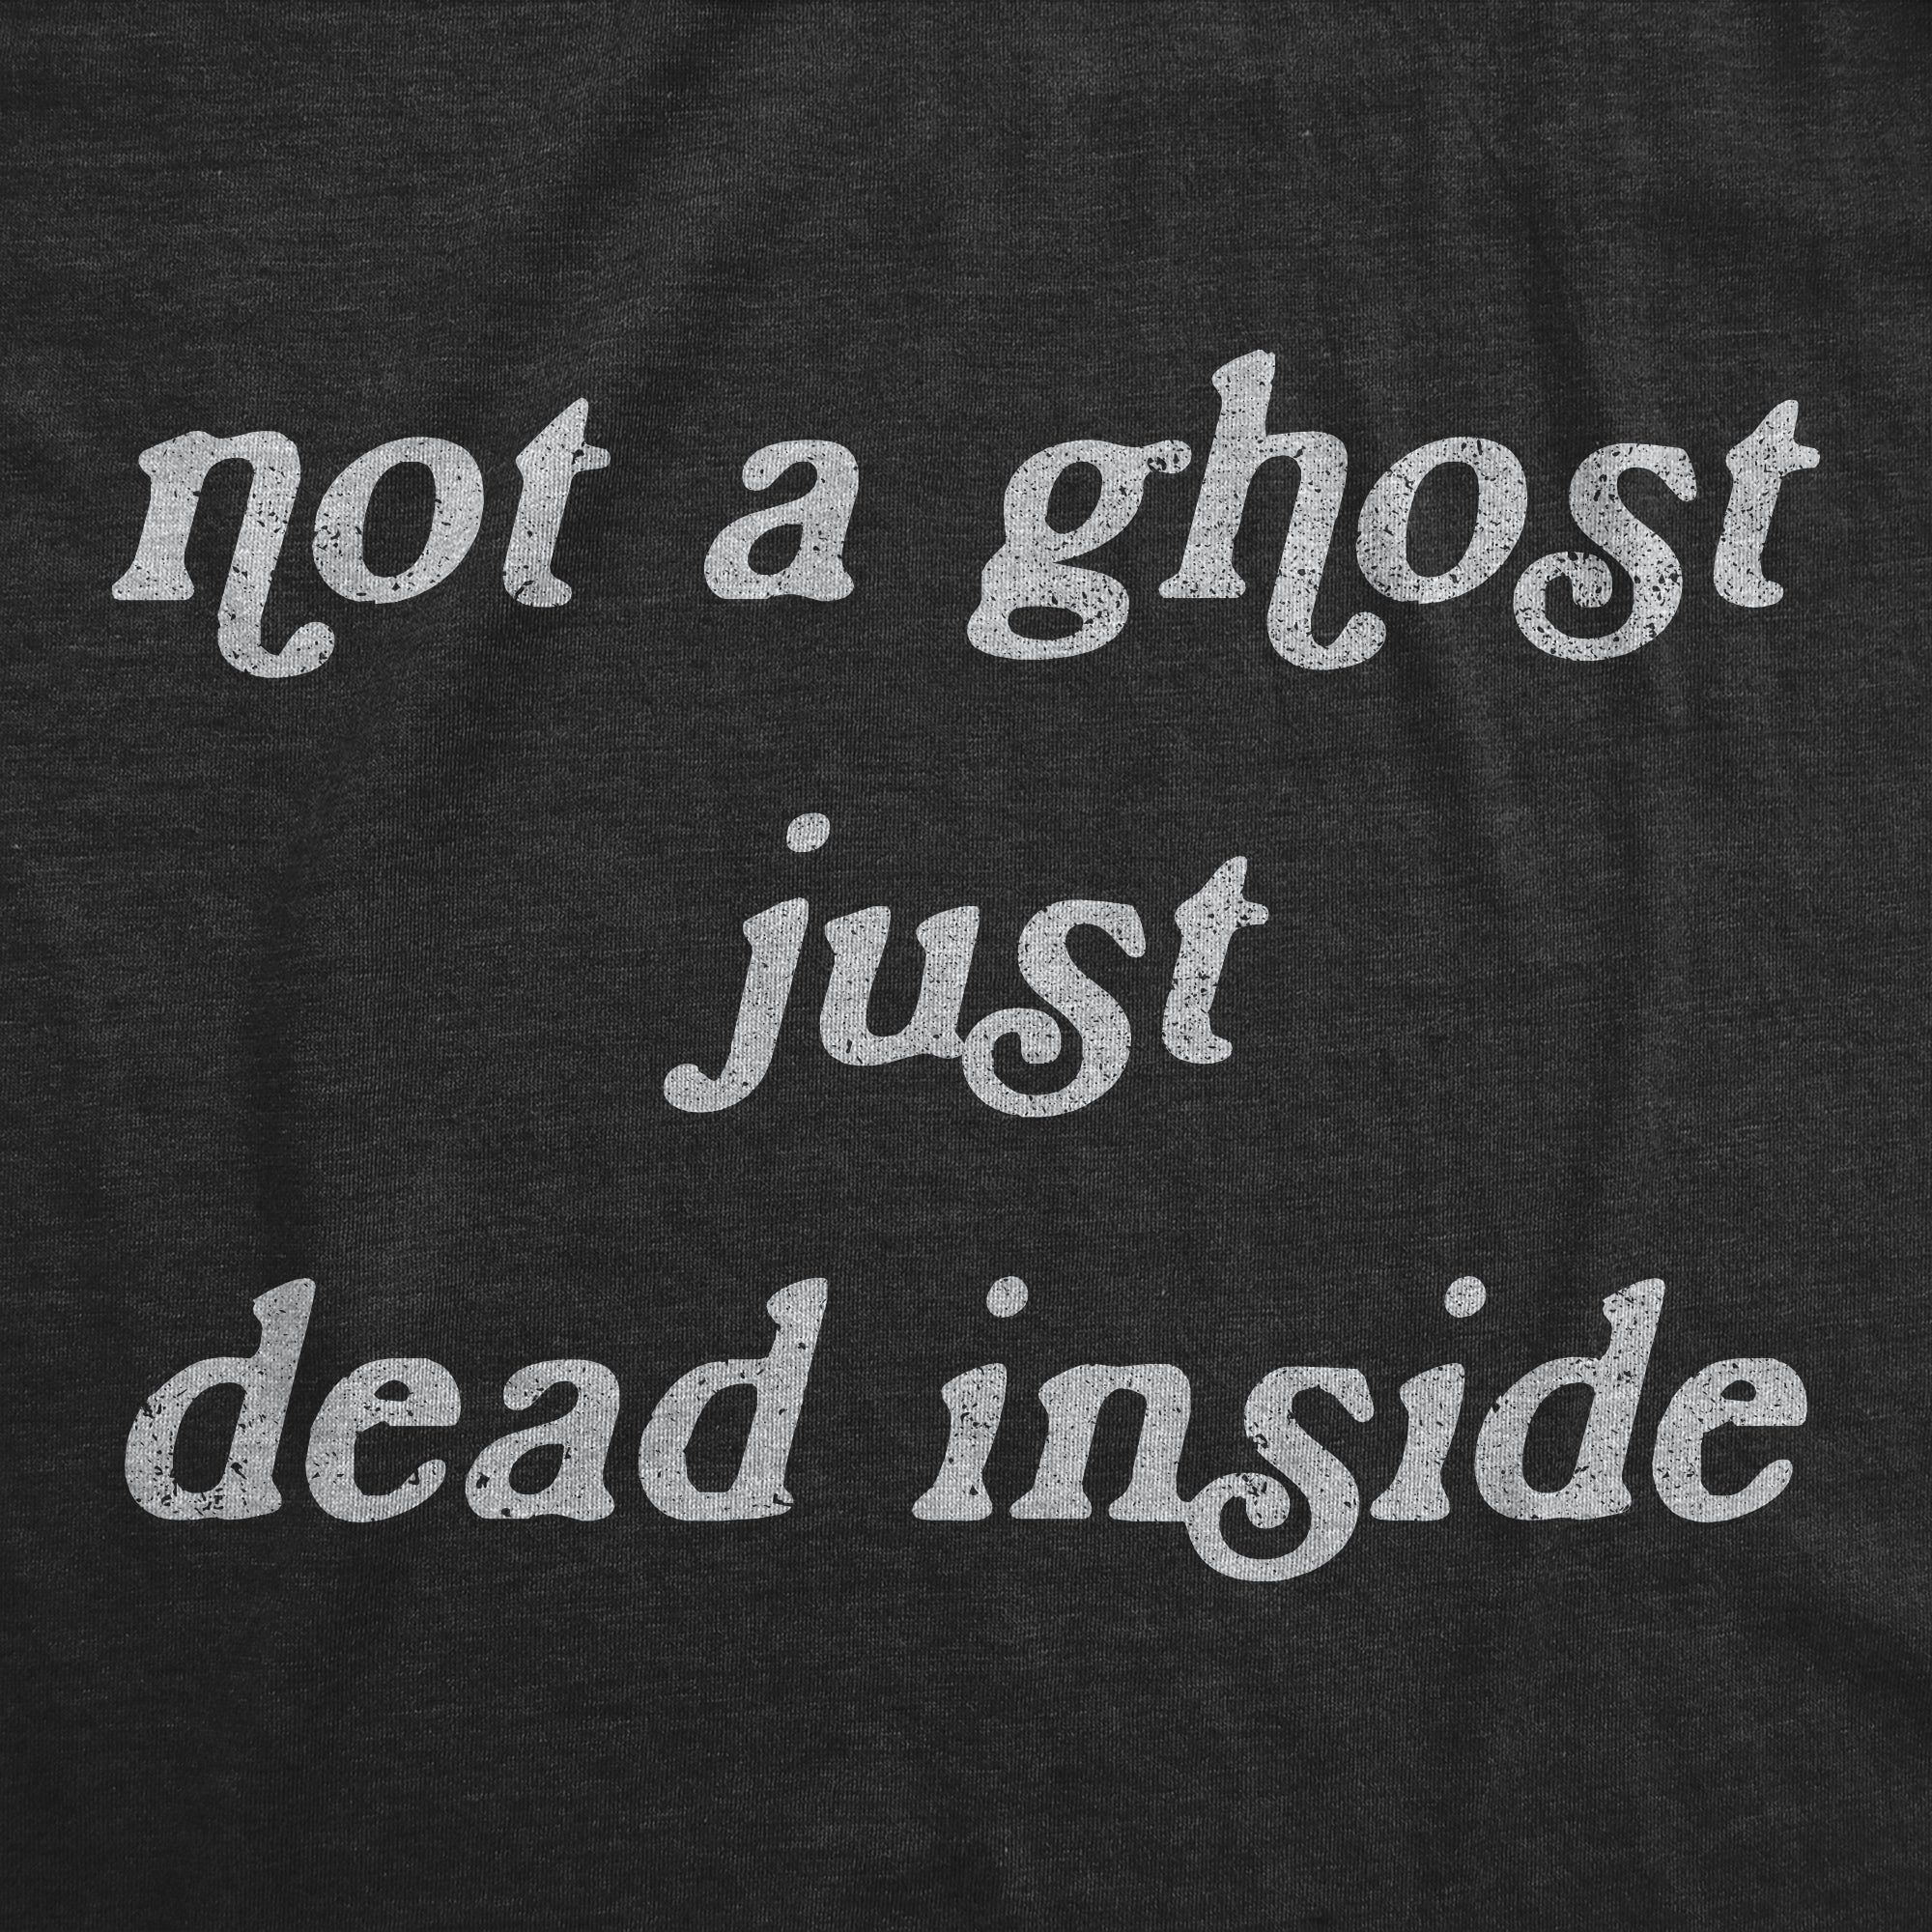 Funny Heather Black - Not a Ghost Not A Ghost Just Dead Inside Mens T Shirt Nerdy Halloween Tee